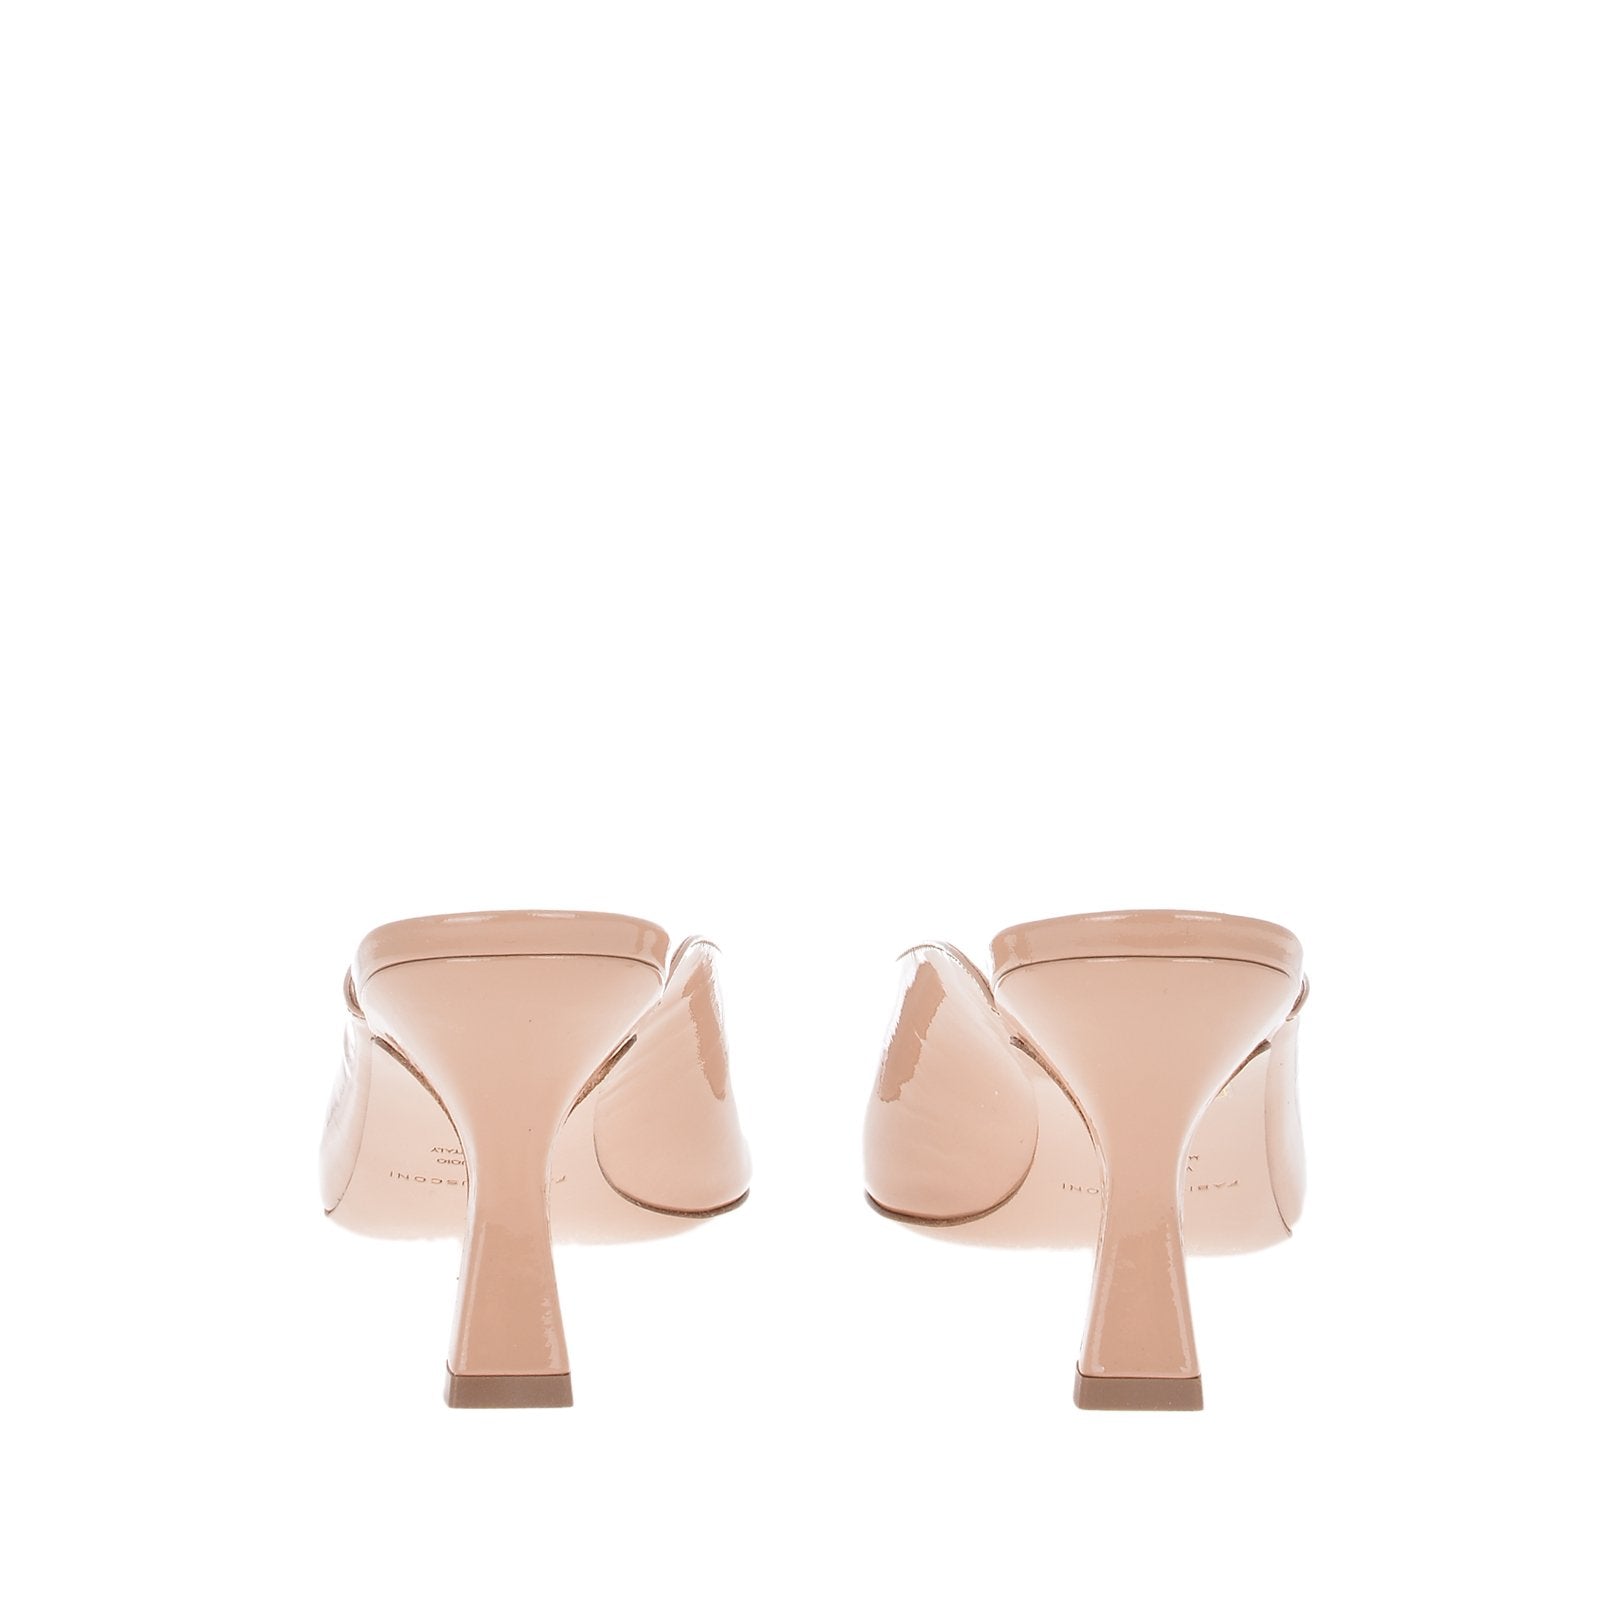 Ceppo Nude White Patent Mules Heels PATENT NUDE 2570 - 4